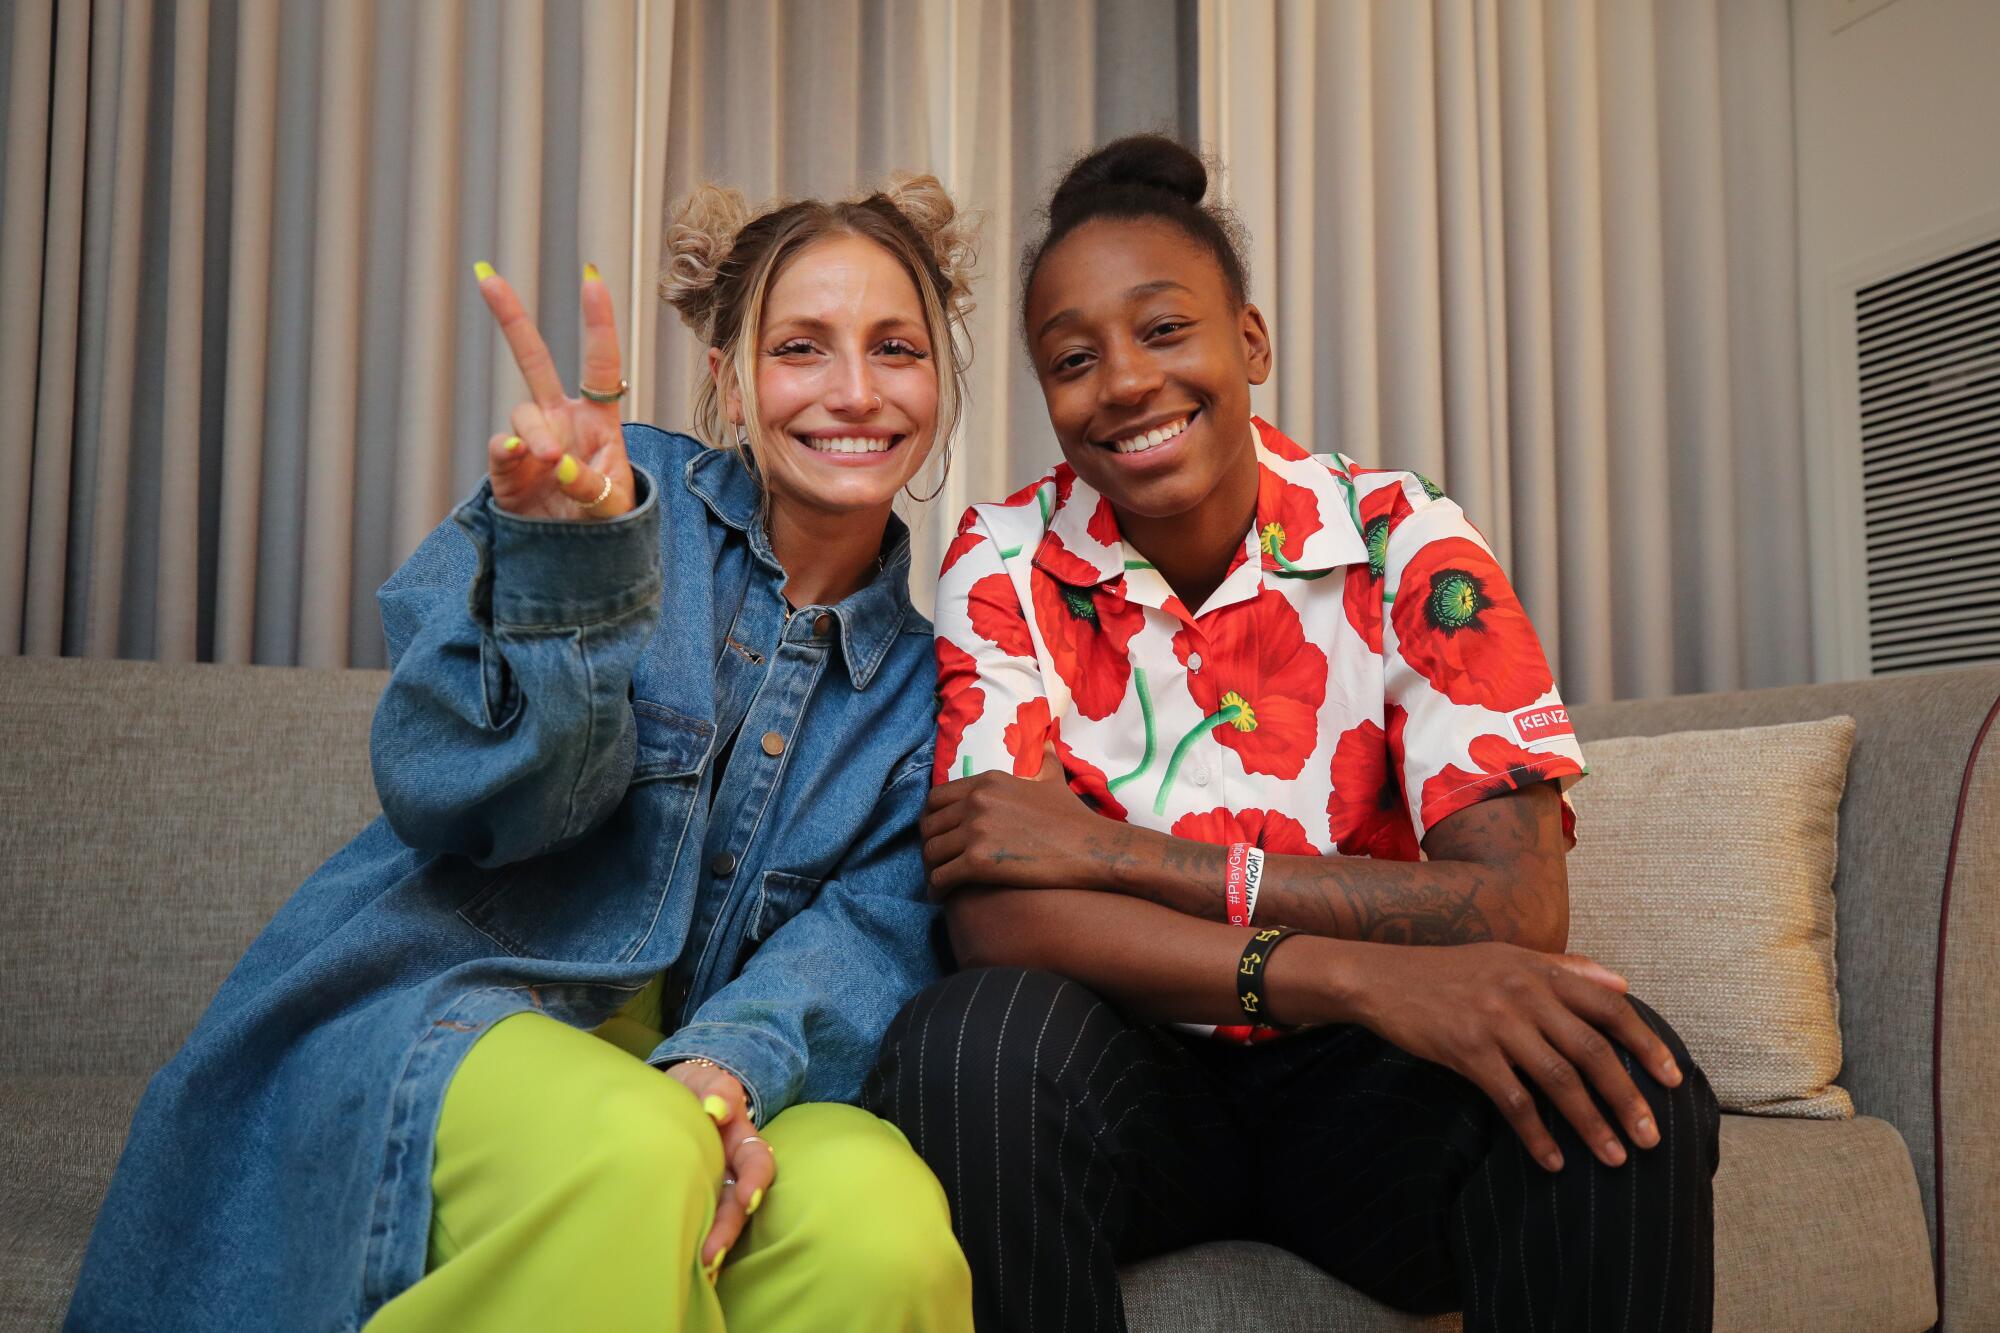 Stylist Sydney Bordonaro gives the peace sign as she poses for a photo with WNBA star Jewell Loyd pose for a photo.